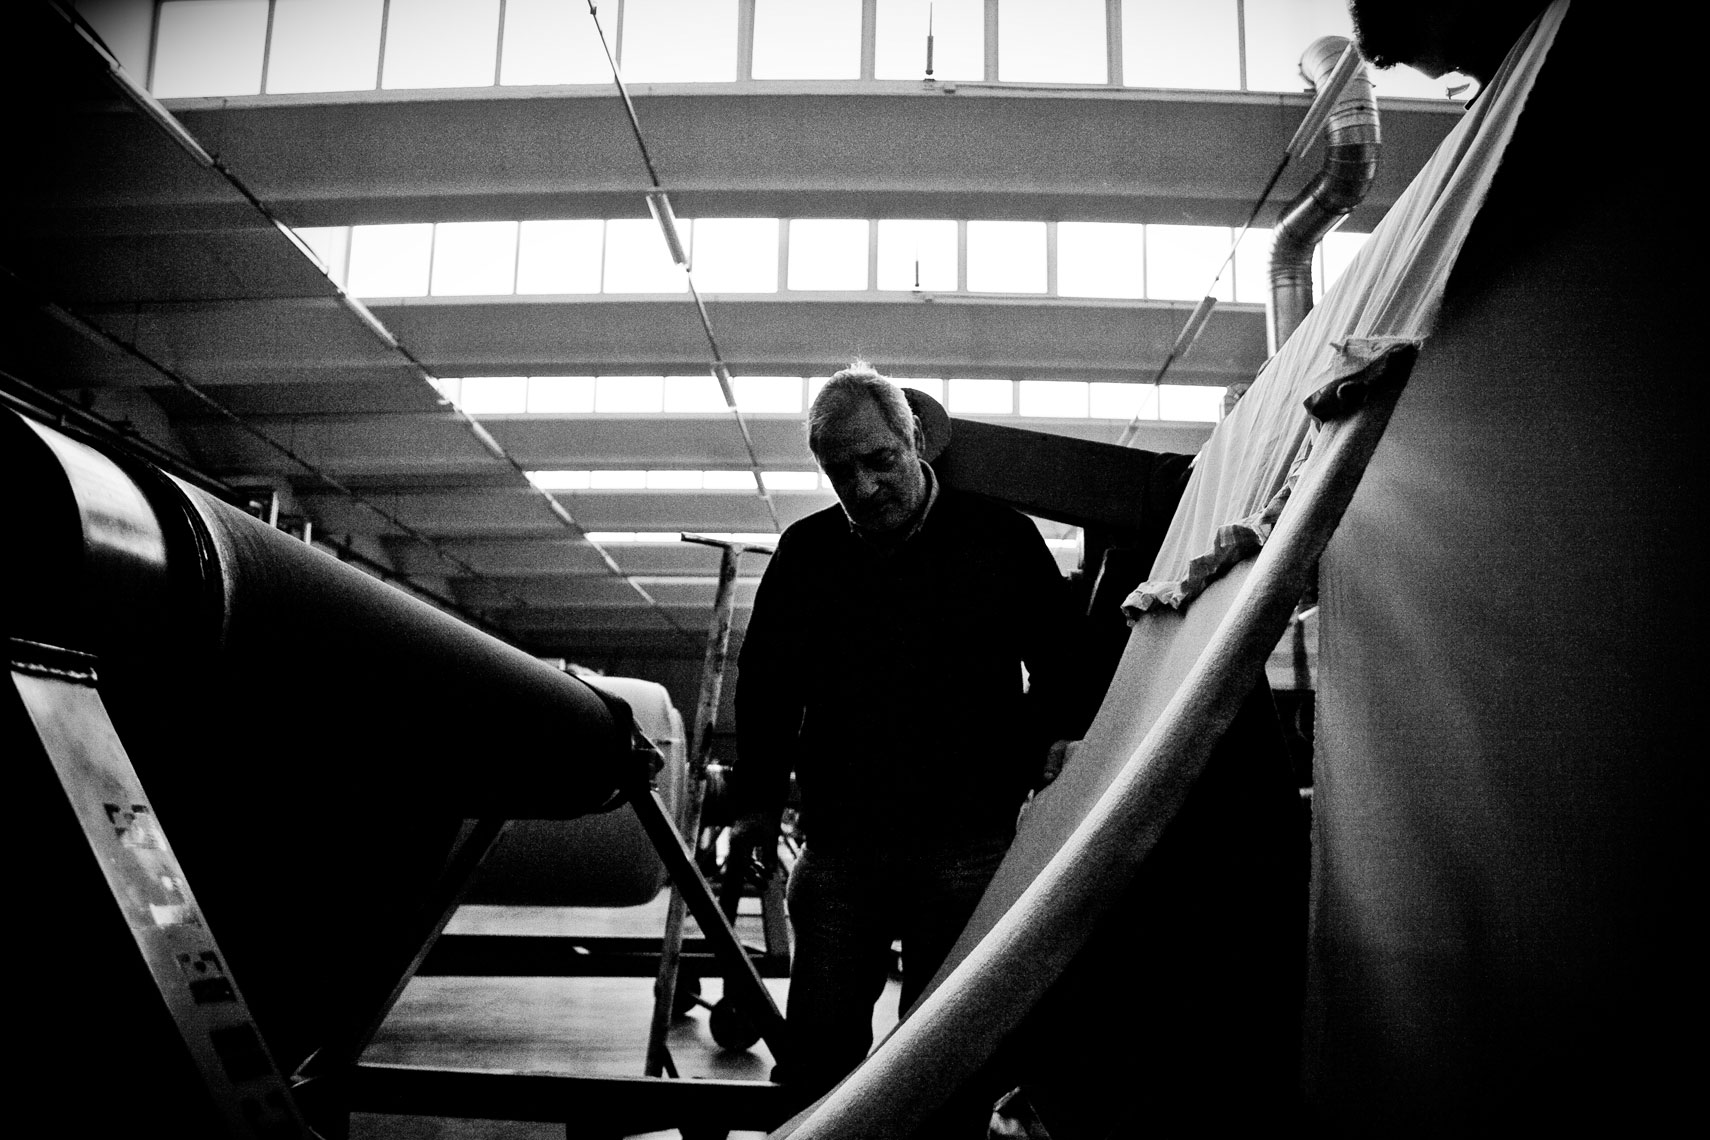 ITALY. Montemurlo (Prato), 2nd April 2009. A worker checks the passage of a tissue through a finishing machine.